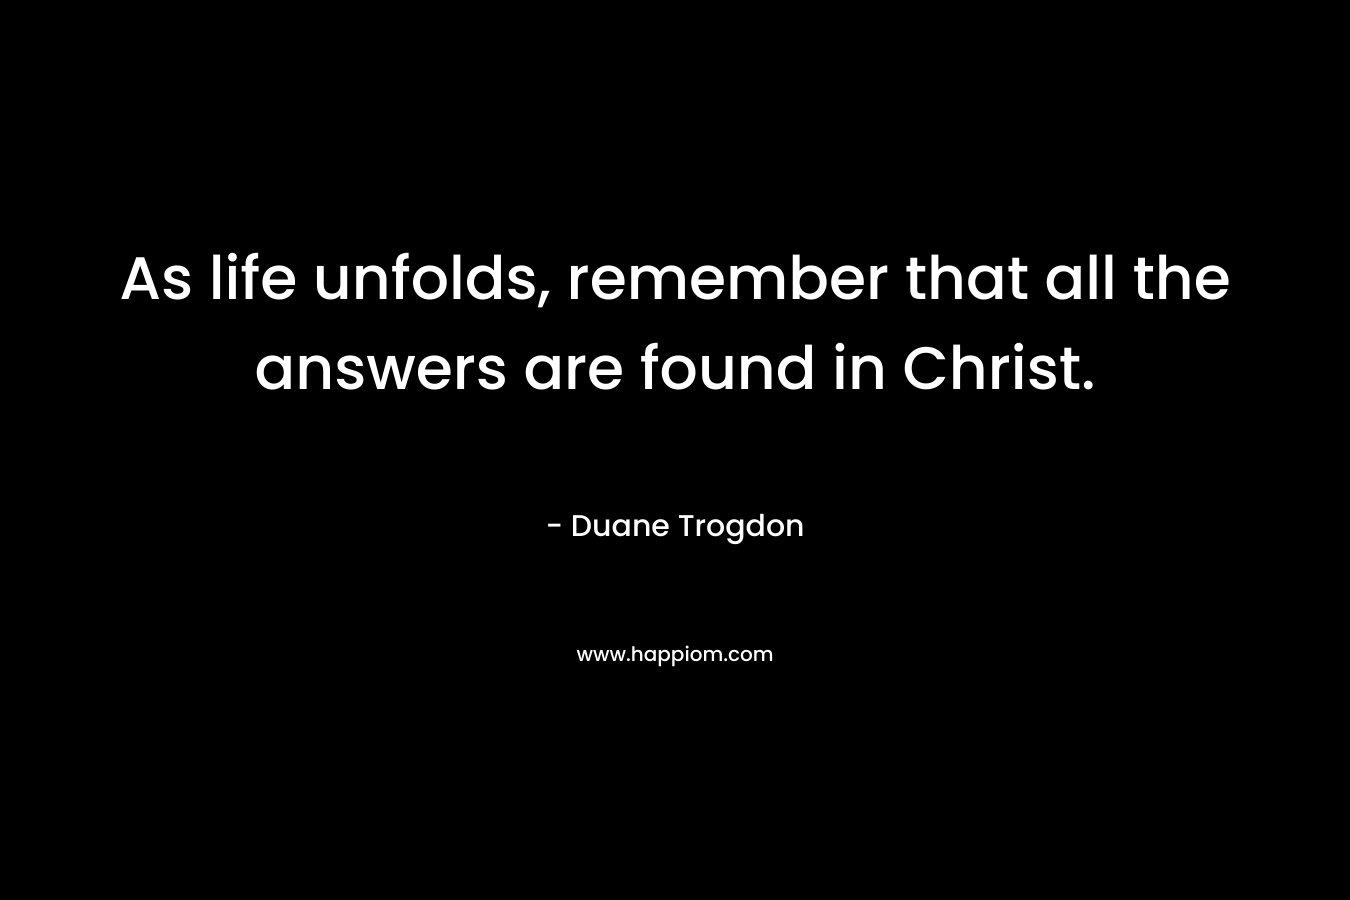 As life unfolds, remember that all the answers are found in Christ. – Duane Trogdon